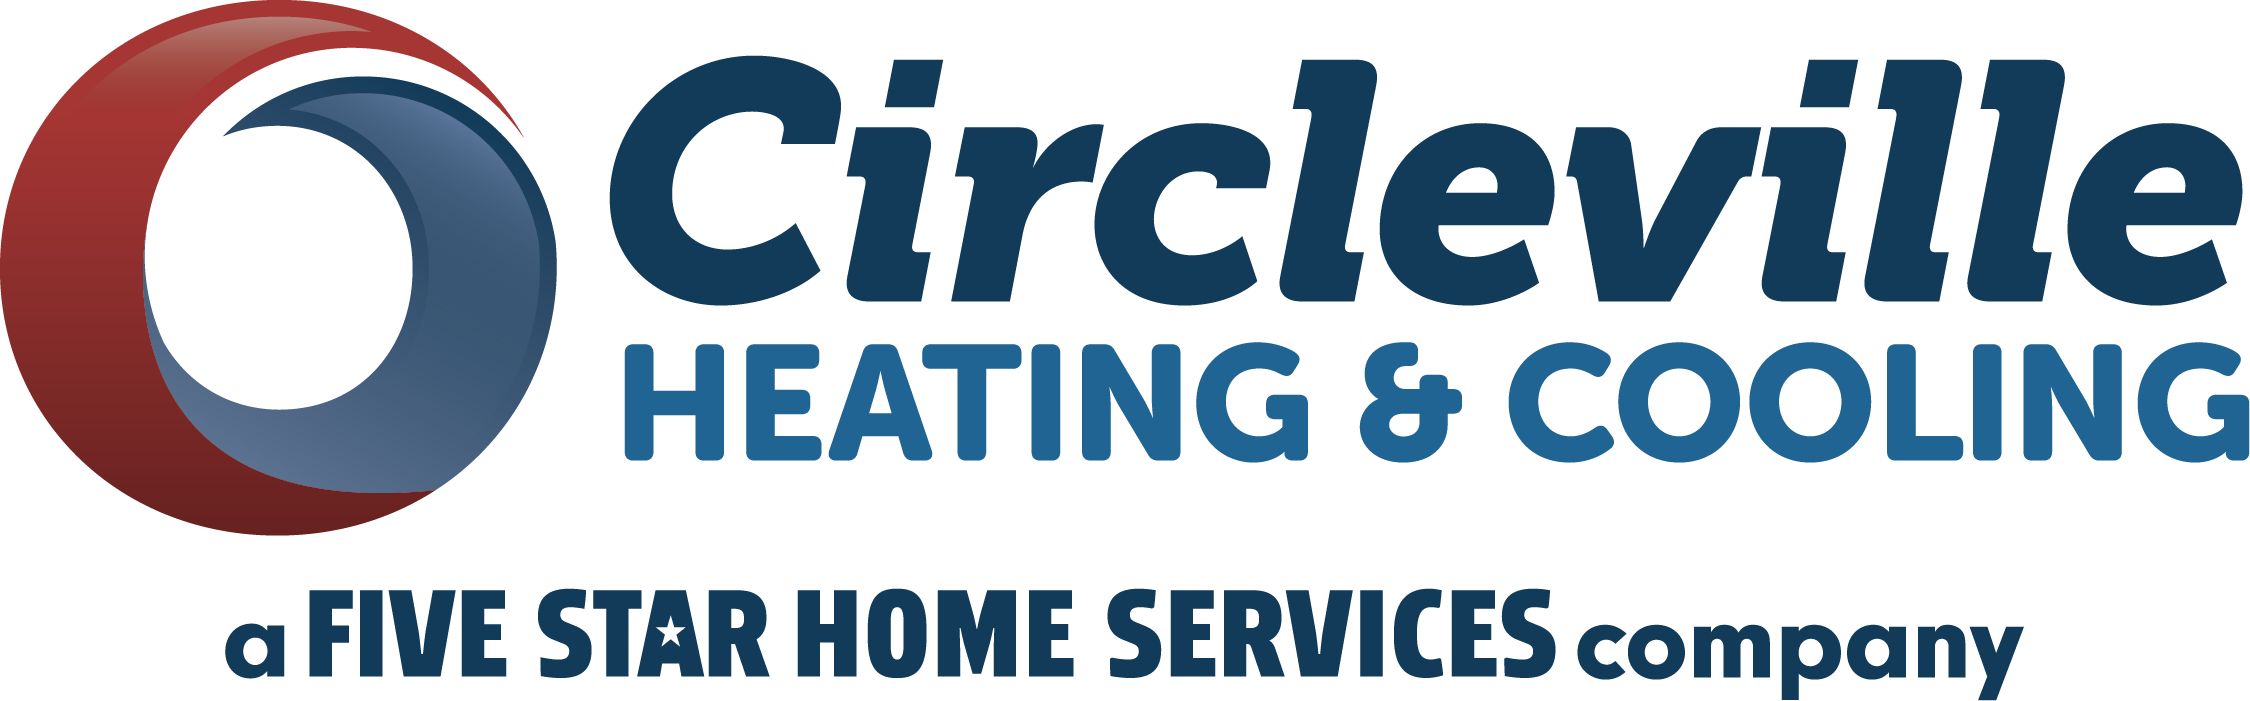 Circleville Heating & Cooling